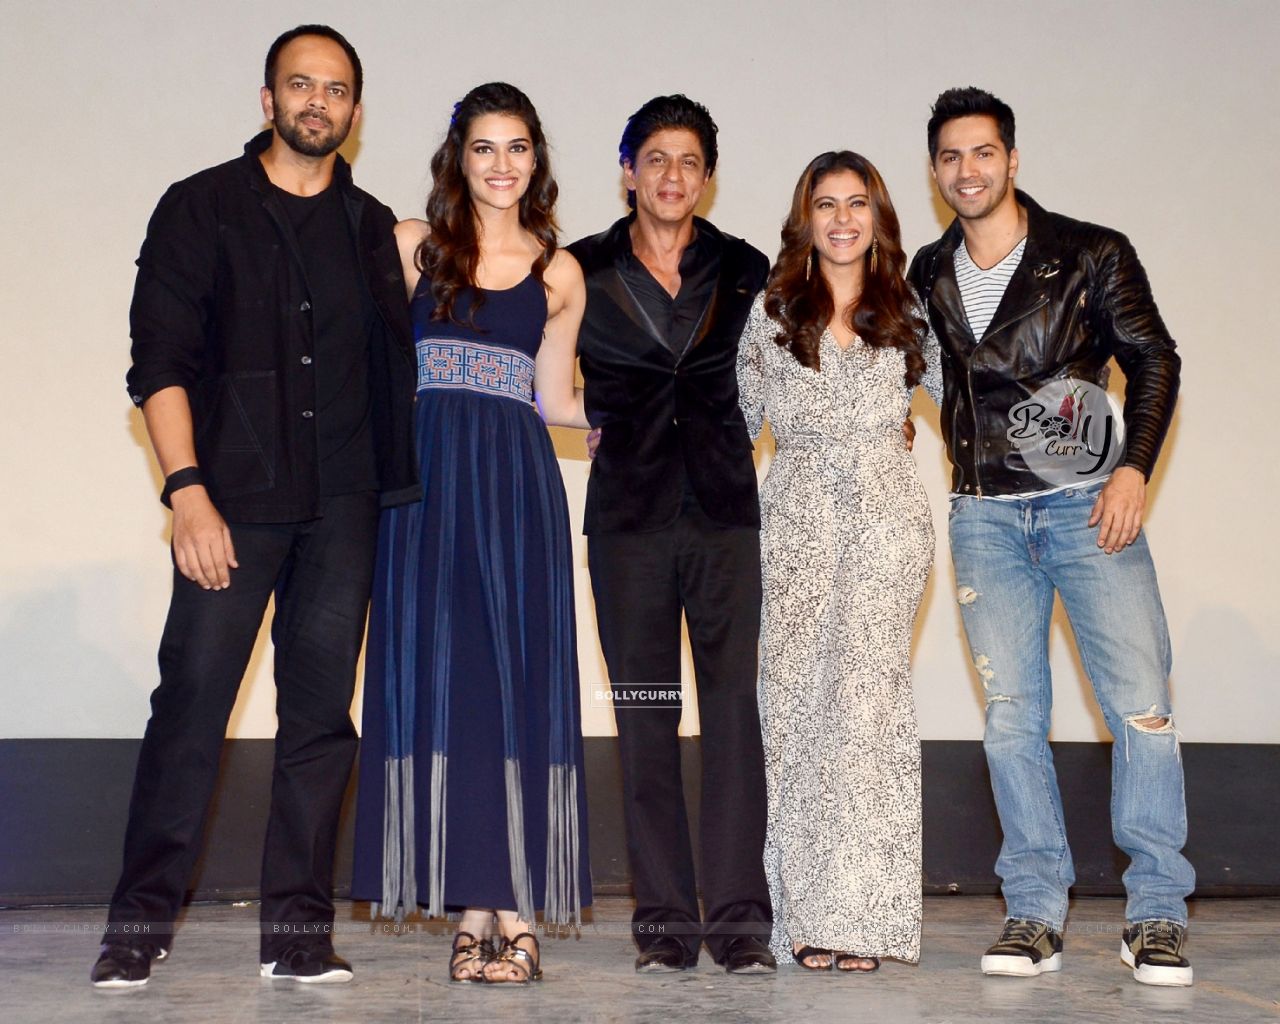 Wallpaper - The star cast at Song Launch of 'Dilwale' (384903)  size:1280x1024